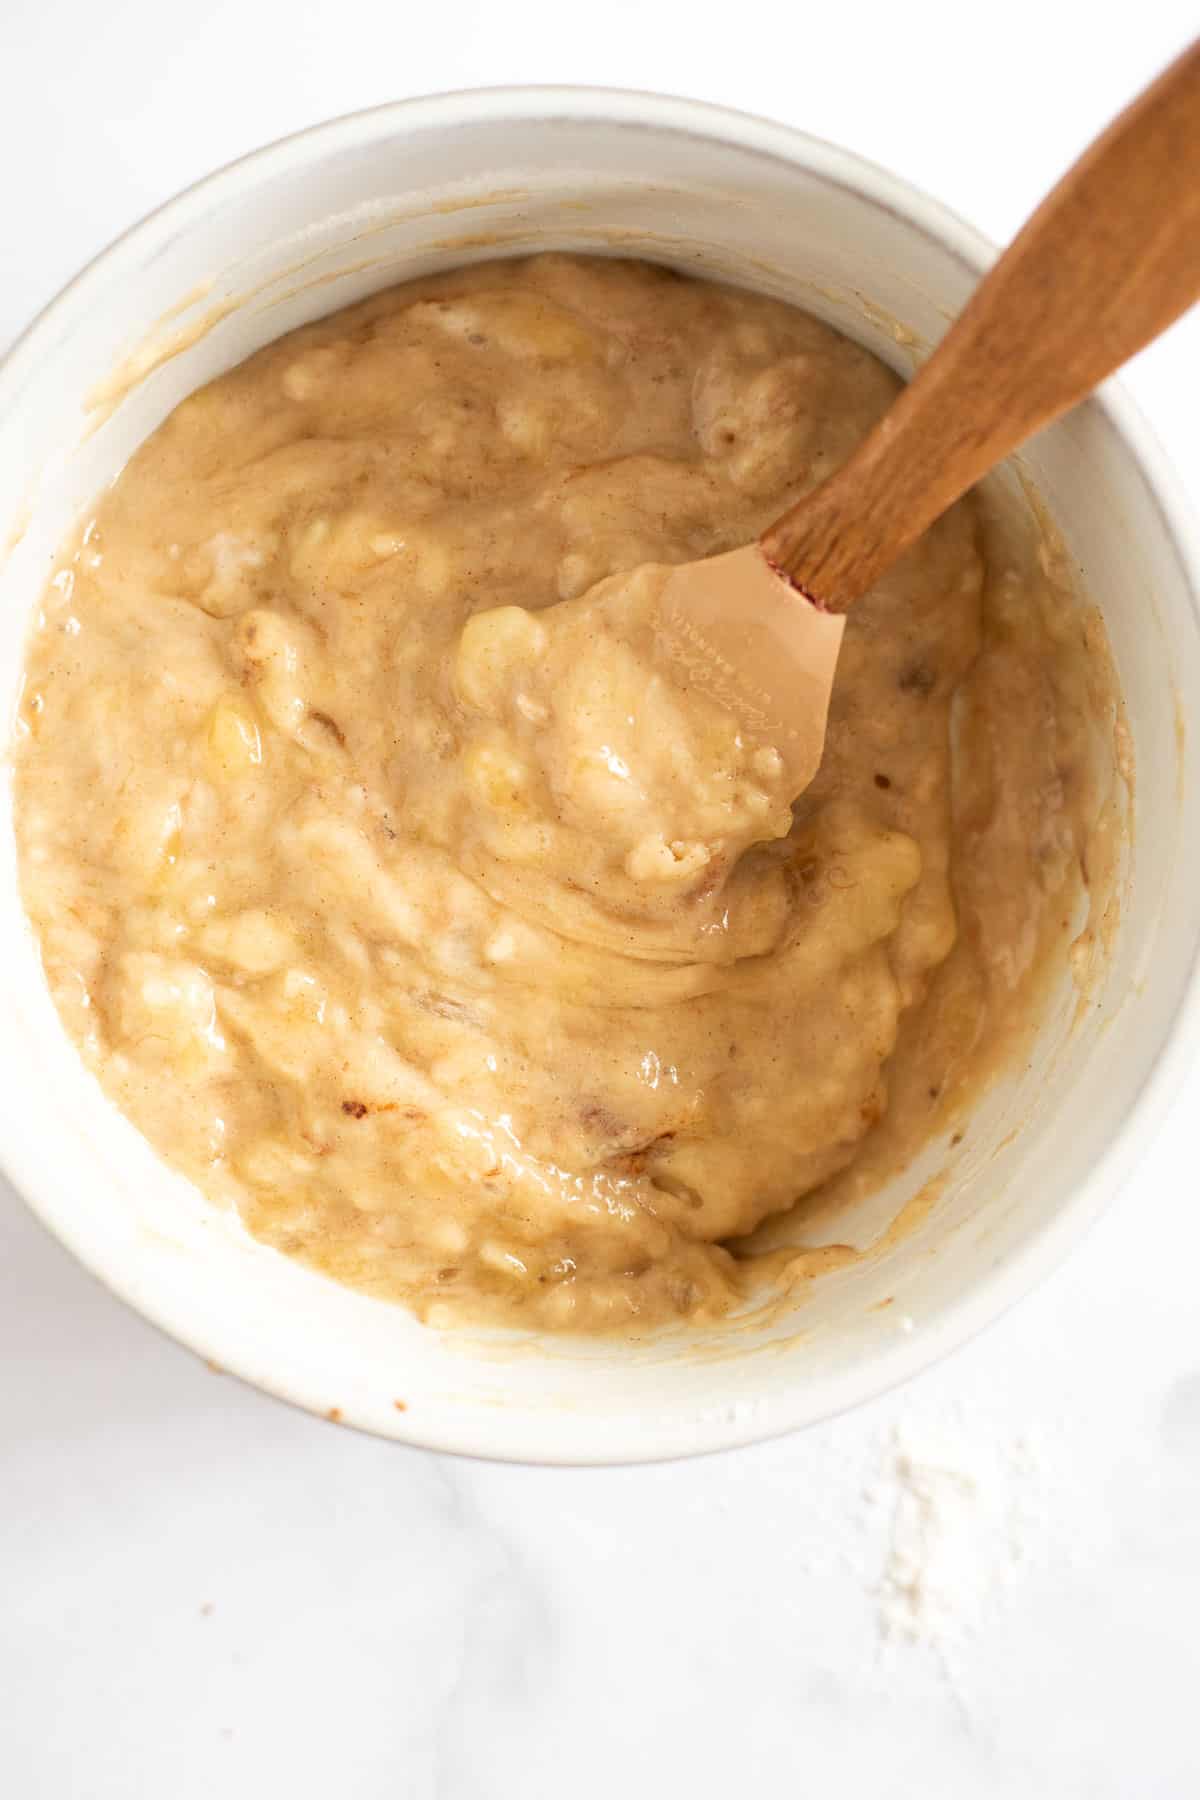 small batch banana bread batter in a white bowl.